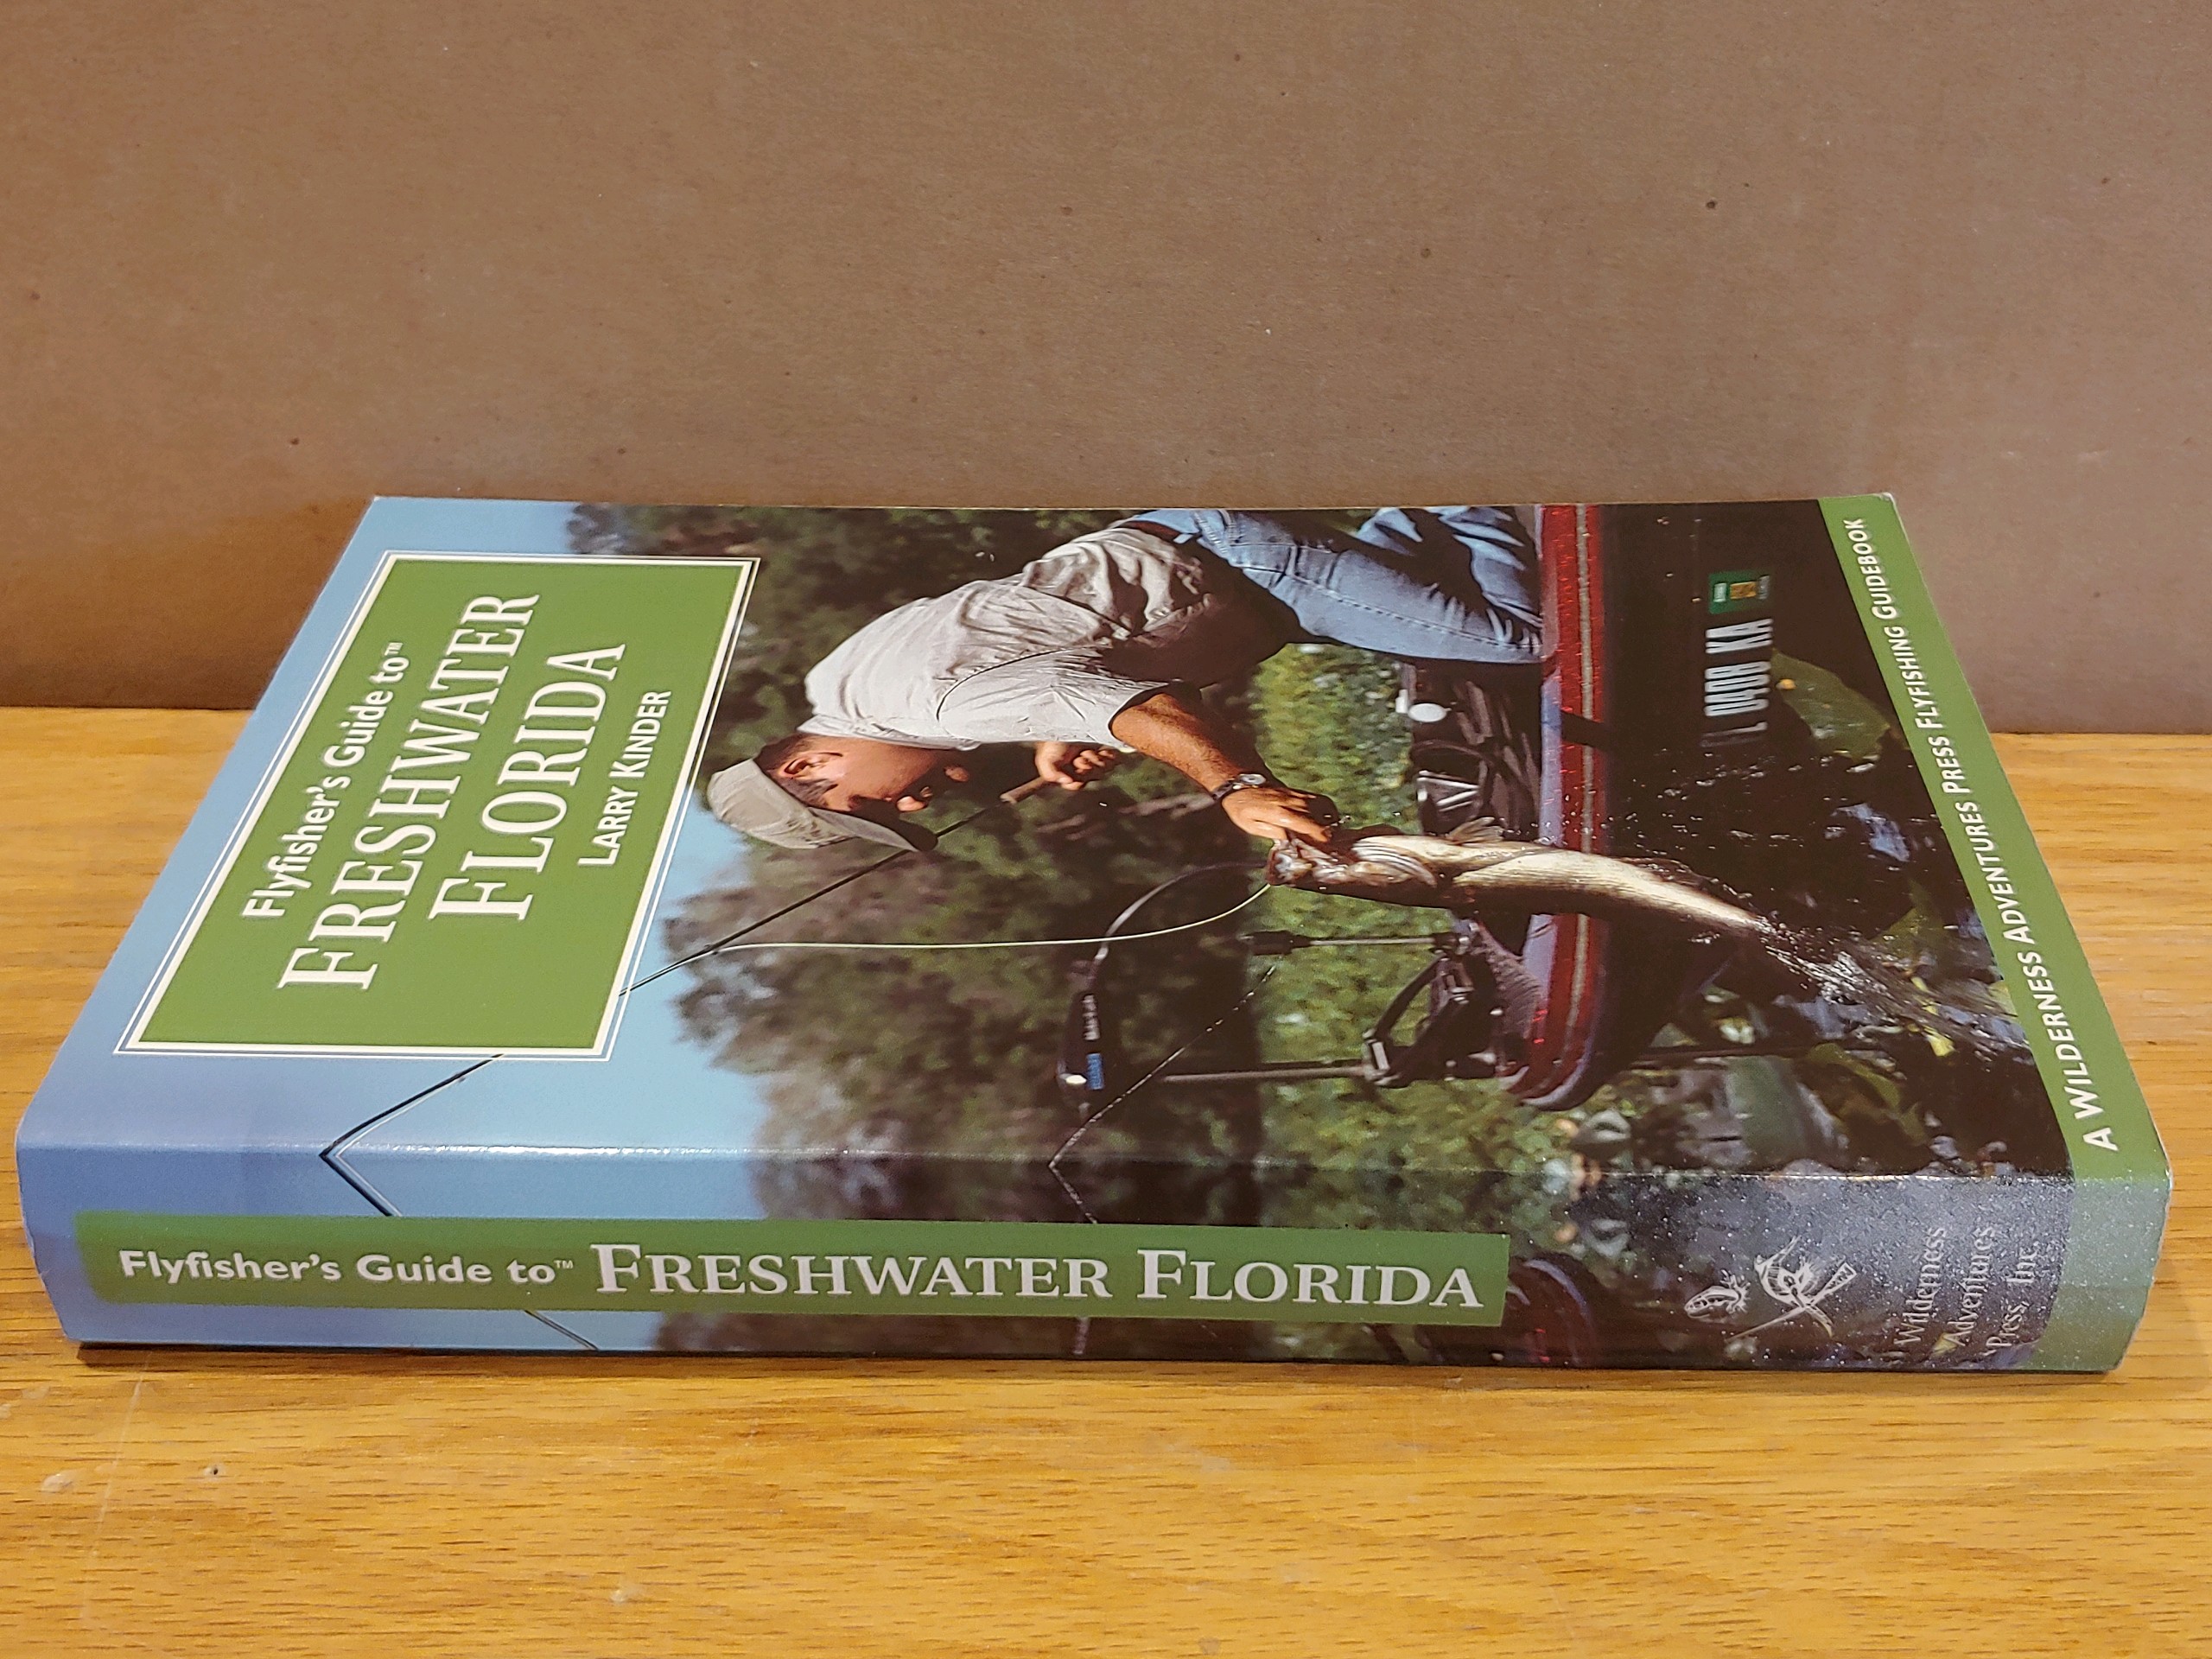 Flyfisher's Guide to Freshwater Florida (